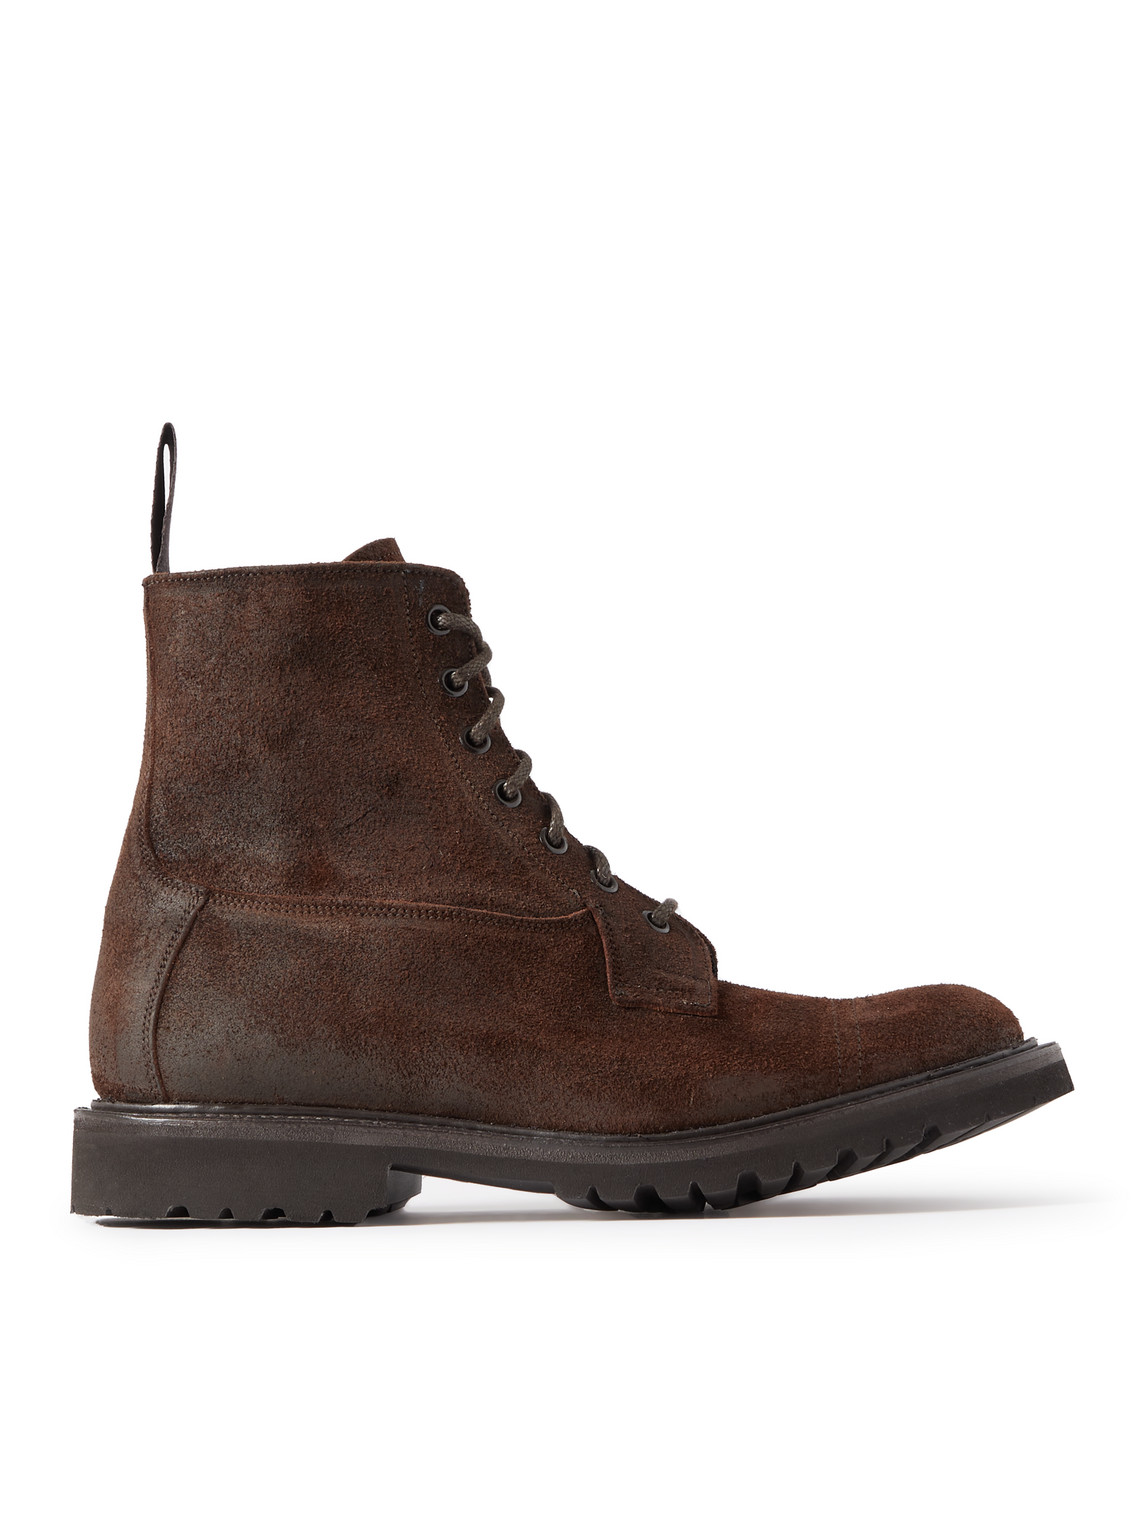 Grassmere Waxed-Suede Boots